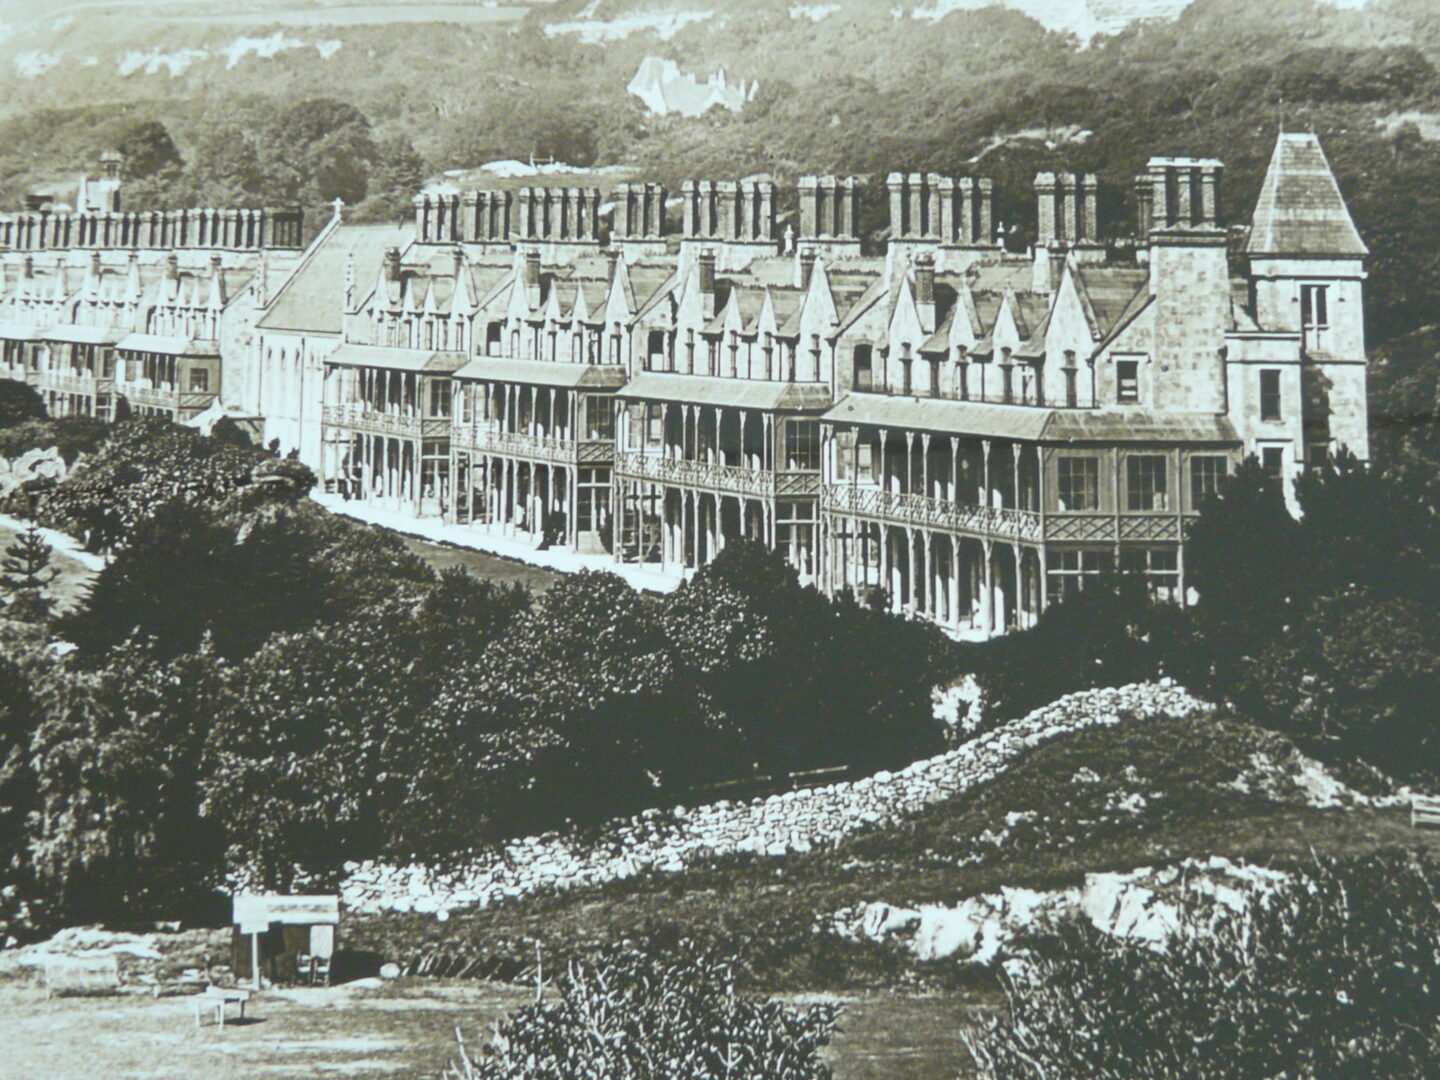 An old image of the Hospital that once stood on the grounds here at Ventnor Botanic Garden